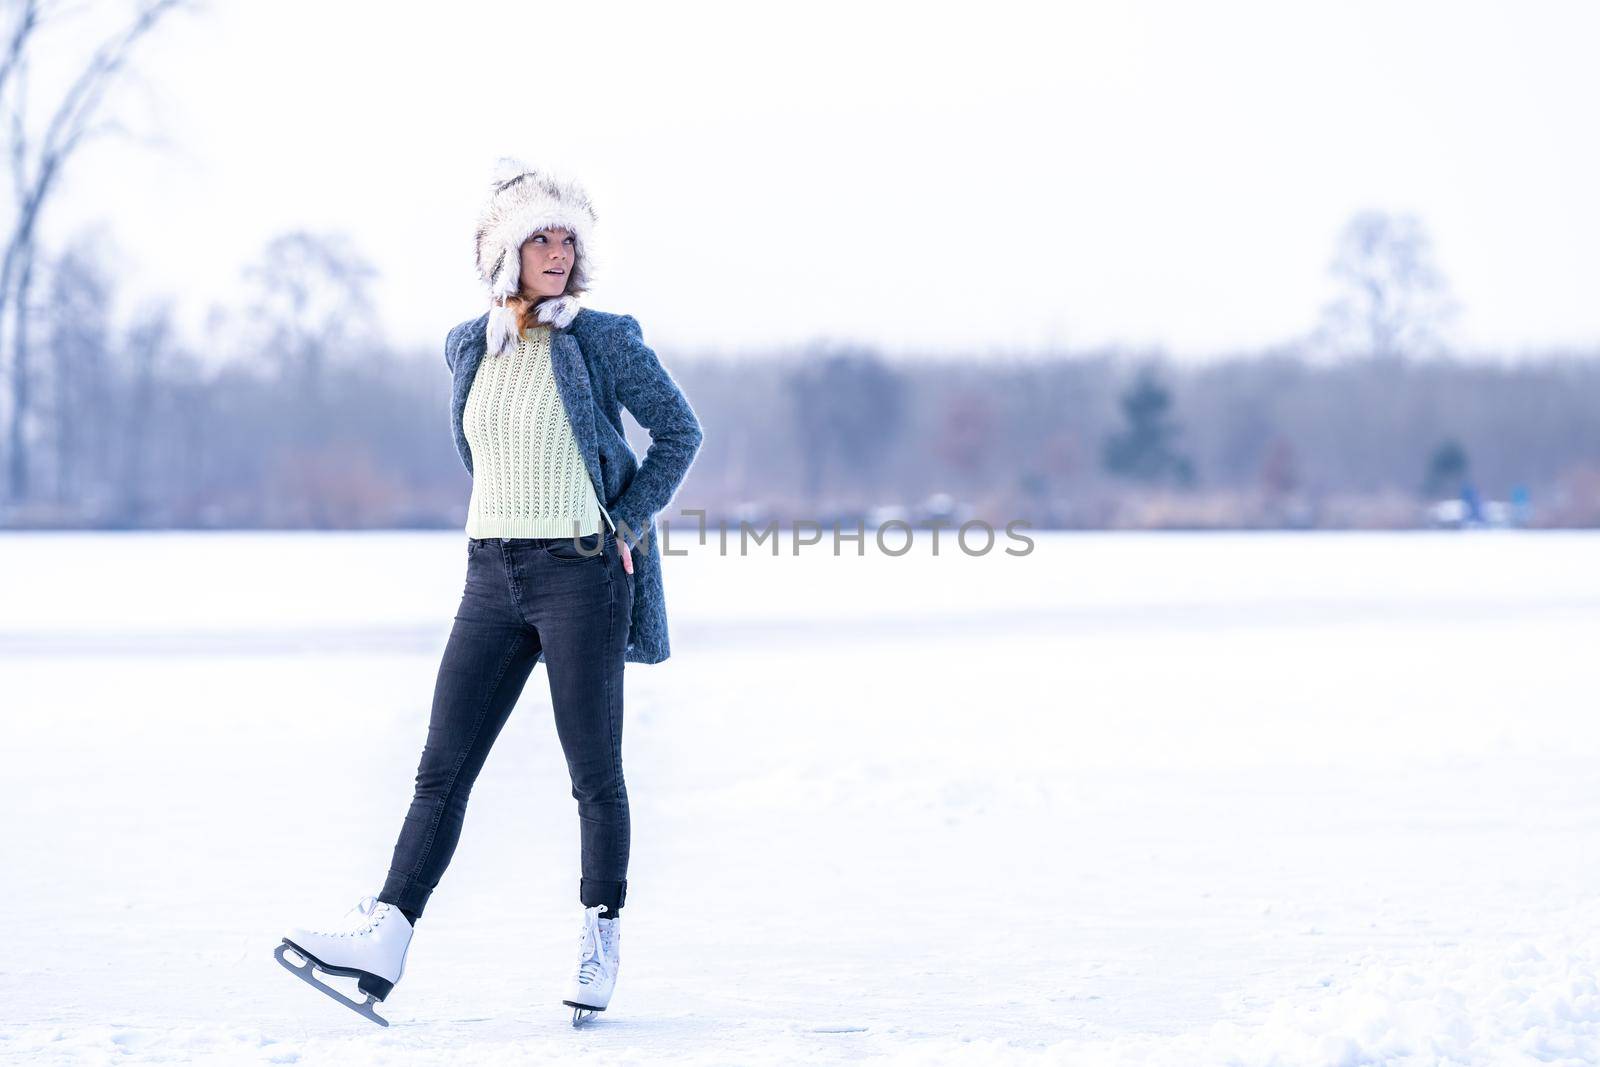 Gorgeous woman skating on frozen lake in winter by Edophoto